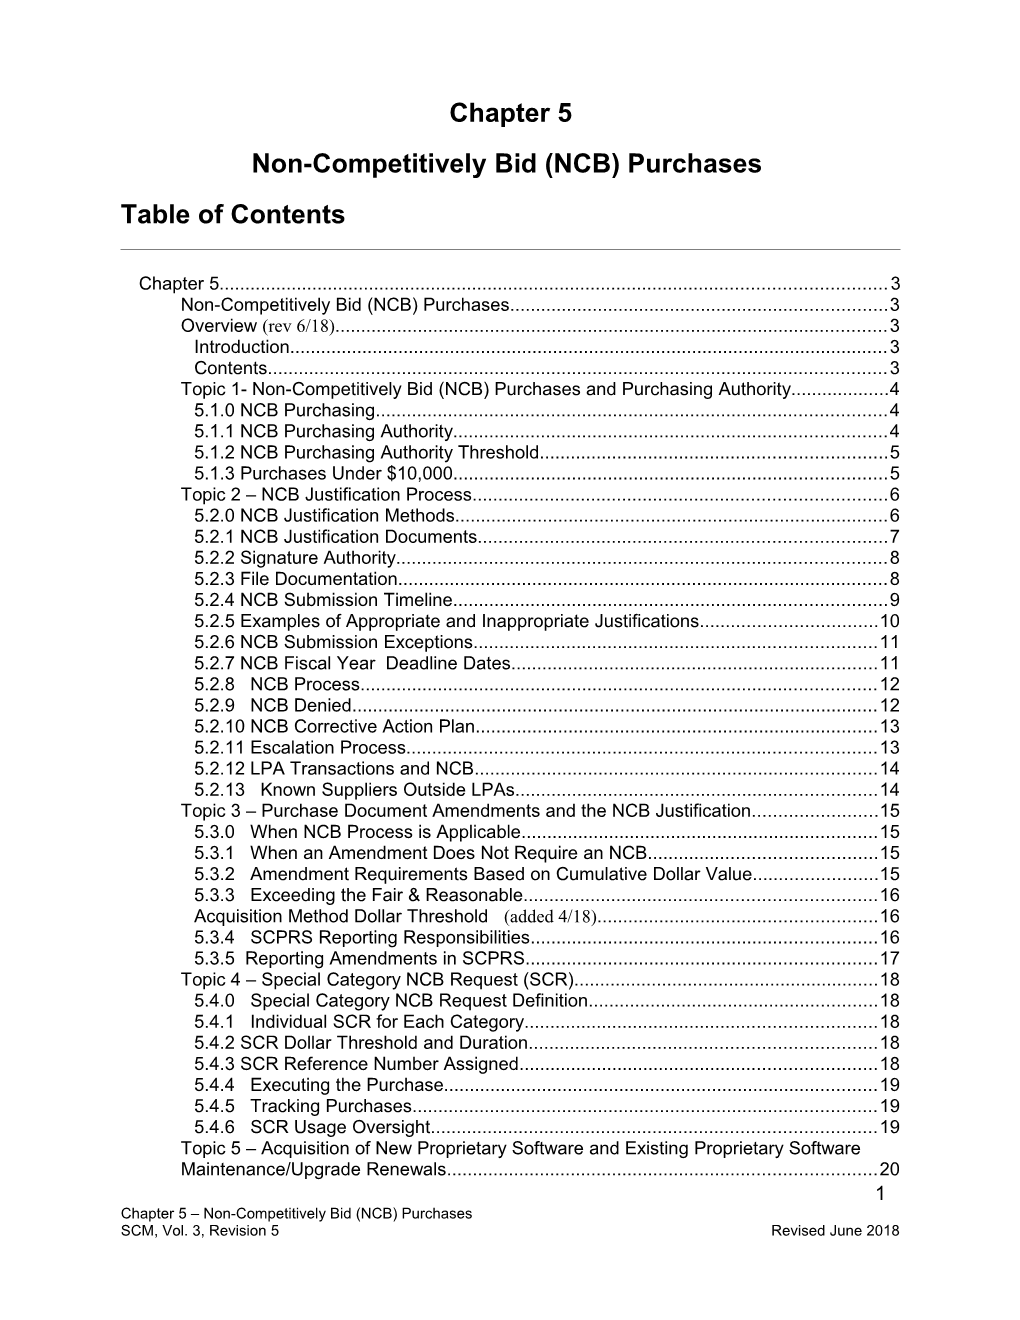 Non-Competitively Bid (NCB) Purchases